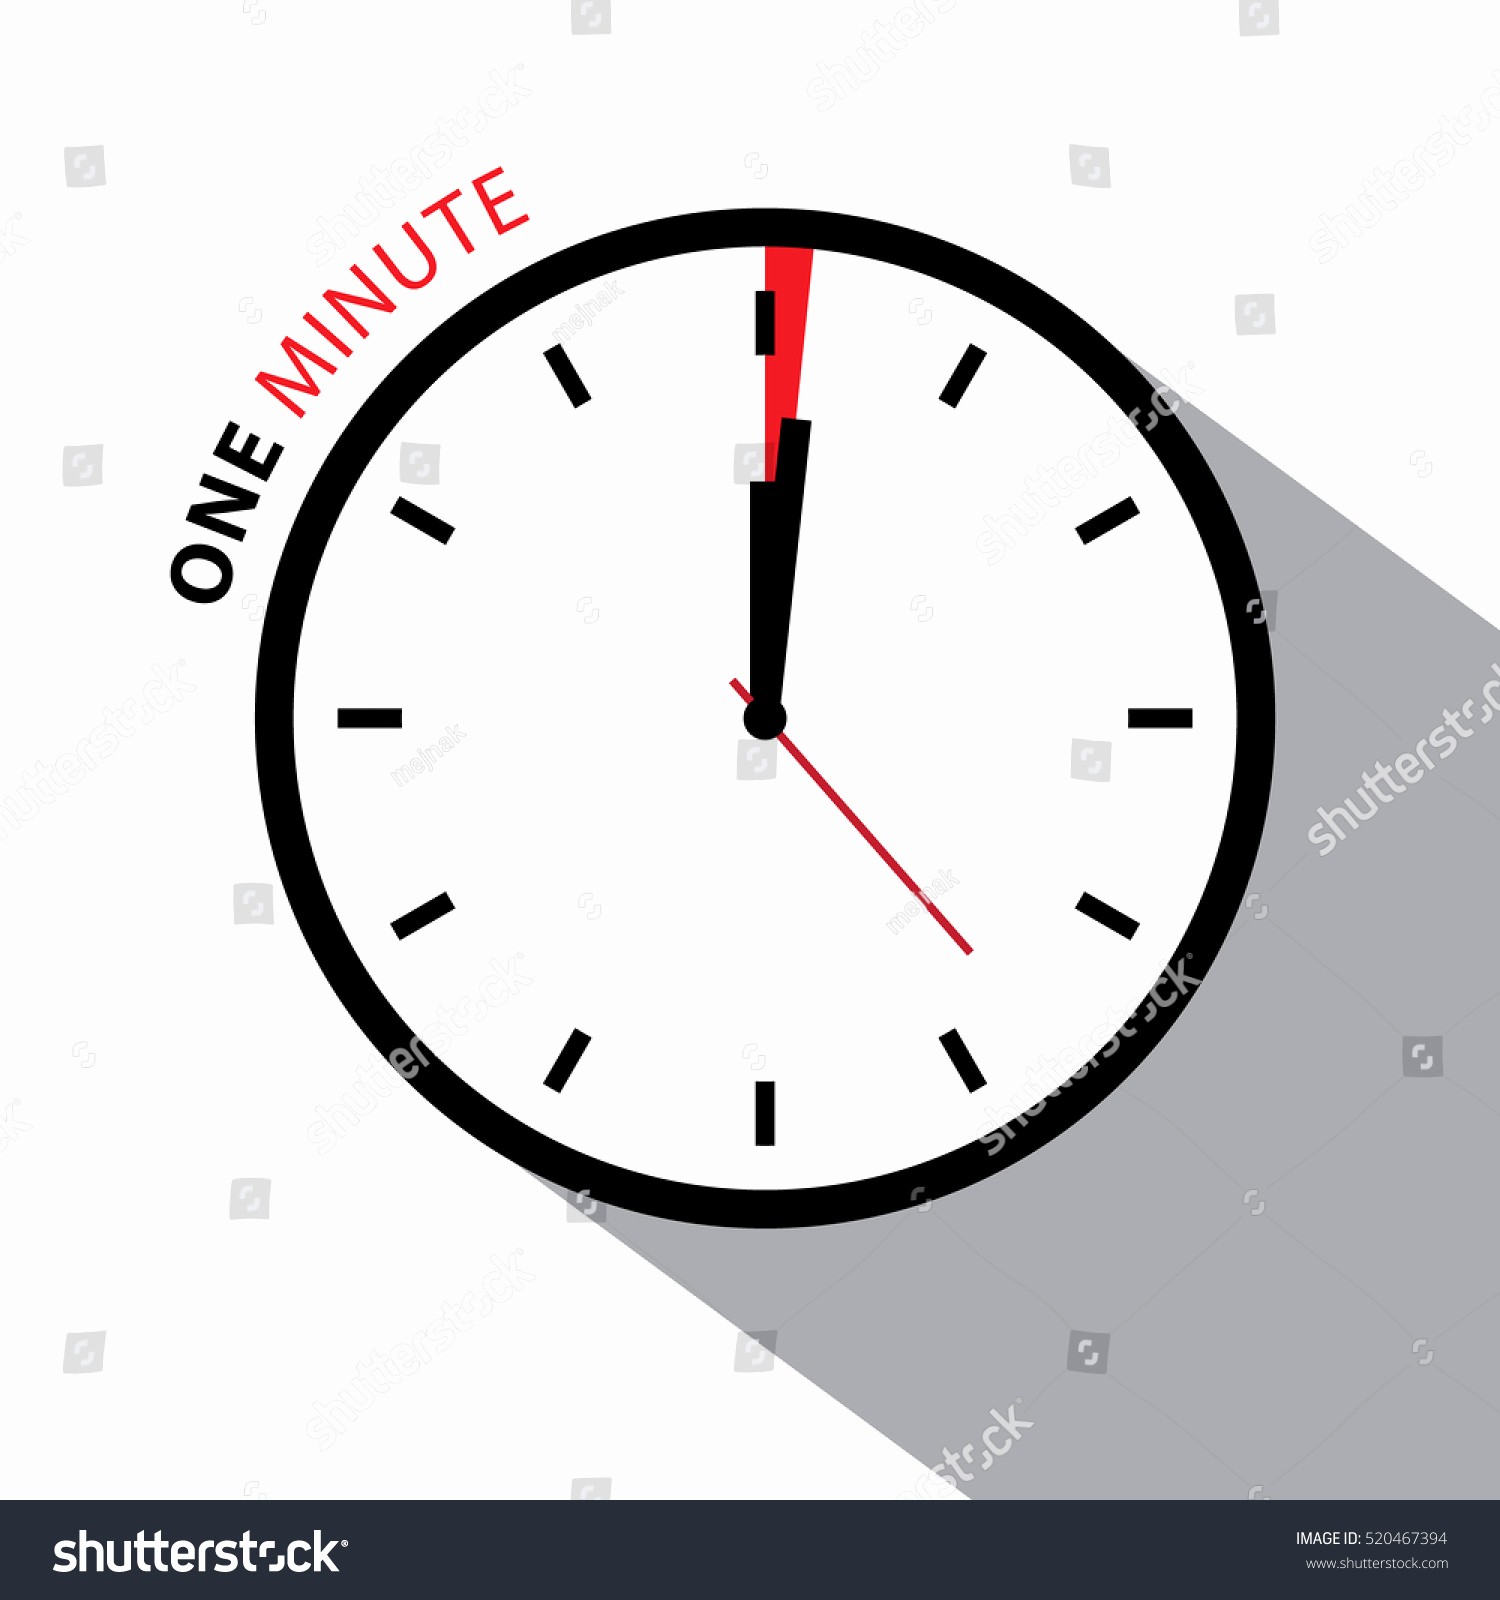 A Timer for 1 Minutes Inspirational E Minute Clock Stopwatch Countdown Vector Stock Vector